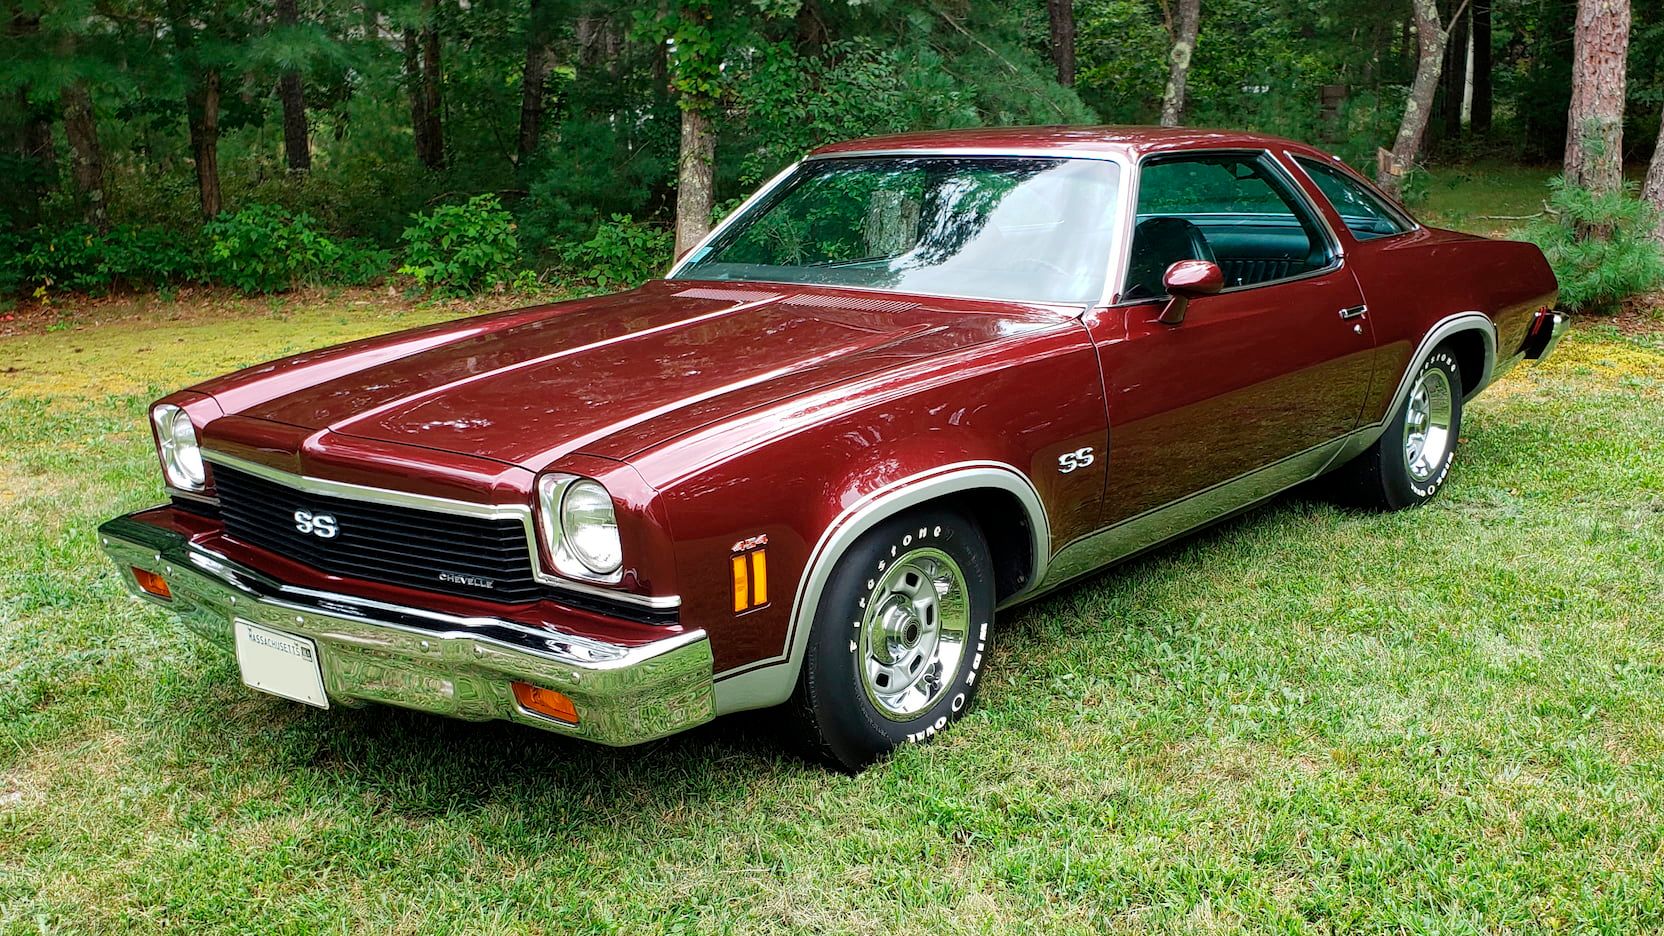 A parked 1977 Chevy Chevelle SS